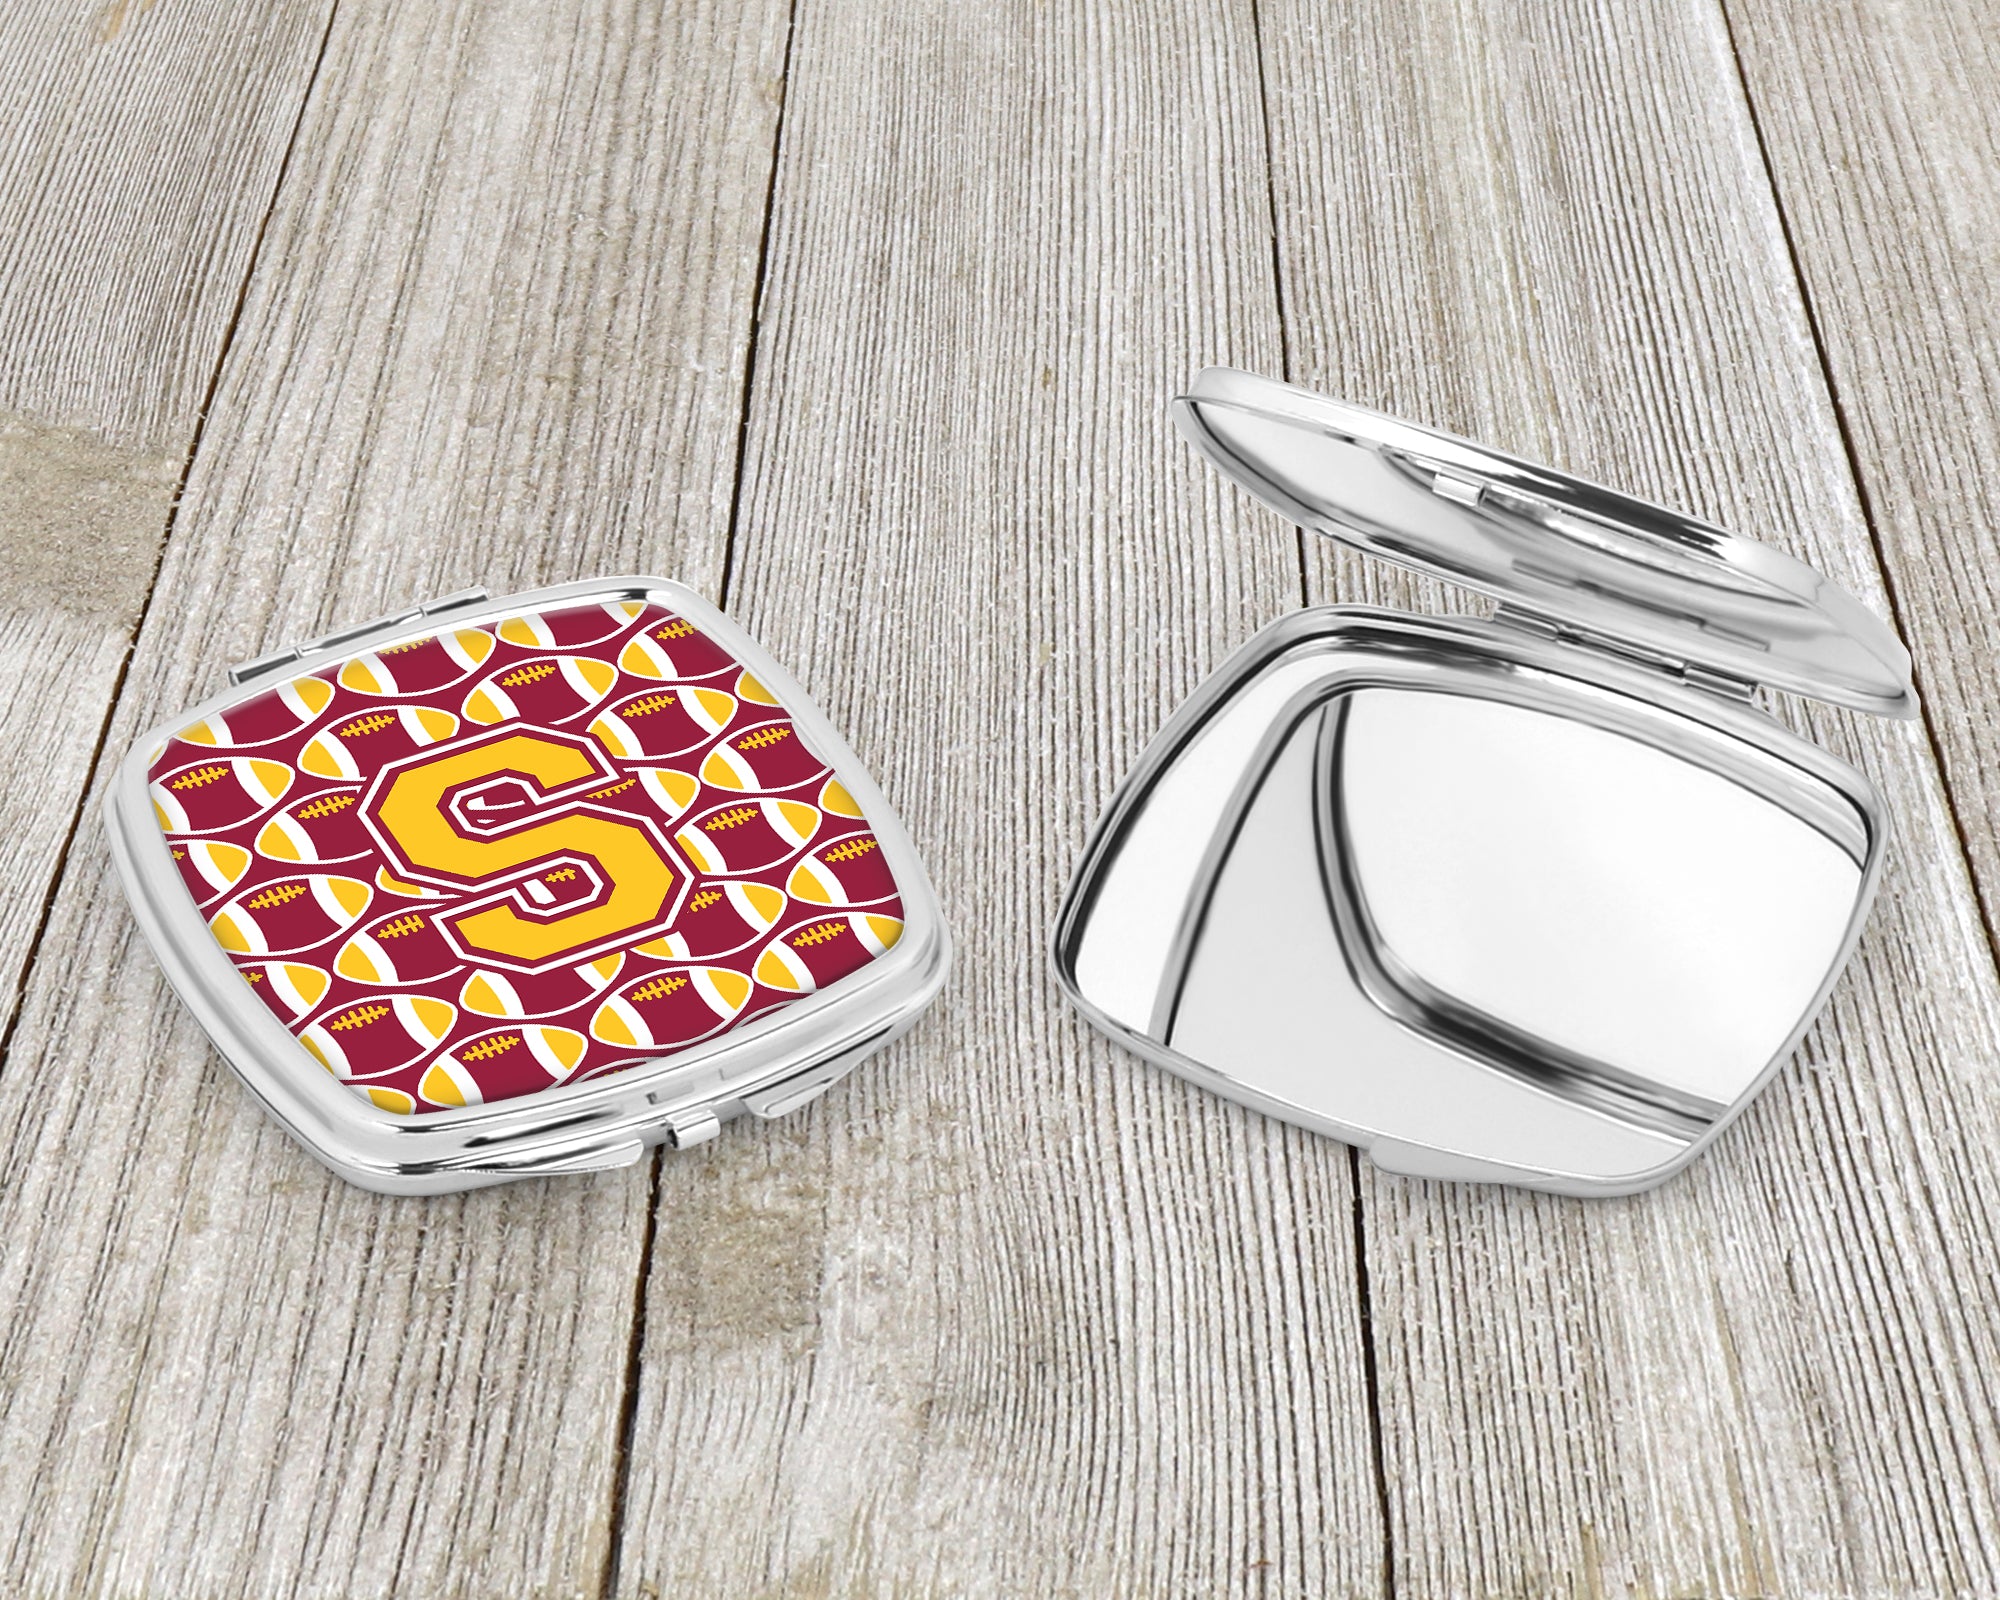 Letter S Football Maroon and Gold Compact Mirror CJ1081-SSCM